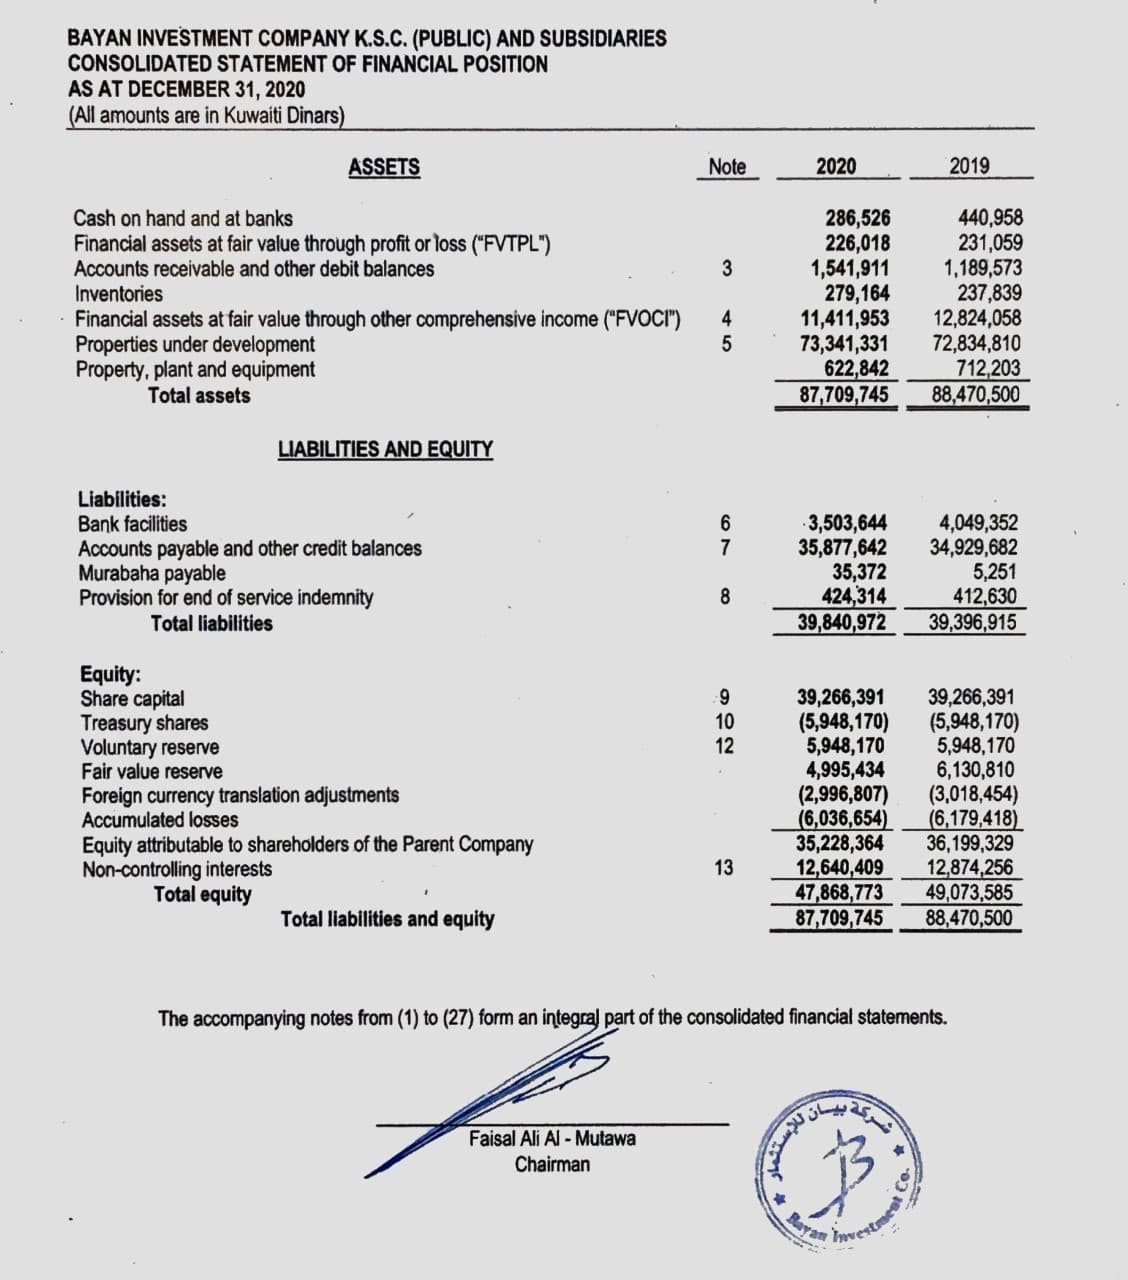 BAYAN INVESTMENT COMPANY K.S.C. (PUBLIC) AND SUBSIDIARIES
CONSOLIDATED STATEMENT OF FINANCIAL POSITION
AS AT DECEMBER 31, 2020
(All amounts are in Kuwaiti Dinars)
ASSETS
Note
2020
2019
Cash on hand and at banks
Financial assets at fair value through profit or loss ("FVTPL")
Accounts receivable and other debit balances
Inventories
Financial assets at fair value through other comprehensive income ("FVOCI")
Properties under development
Property, plant and equipment
286,526
226,018
1,541,911
279,164
11,411,953
73,341,331
622,842
87,709,745
440,958
231,059
1,189,573
237,839
12,824,058
72,834,810
712,203
88,470,500
3
4
Total assets
LIABILITIES AND EQUITY
Liabilities:
Bank facilities
Accounts payable and other credit balances
Murabaha payable
Provision for end of service indemnity
6
3,503,644
35,877,642
35,372
424,314
39,840,972
4,049,352
34,929,682
5,251
412,630
39,396,915
7
Total liabilities
Equity:
Share capital
Treasury shares
Voluntary reserve
Fair value reserve
Foreign currency translation adjustments
Accumulated losses
39,266,391
(5,948,170)
5,948,170
4,995,434
(2,996,807)
(6,036,654)
35,228,364
12,640,409
47,868,773
87,709,745
39,266,391
(5,948,170)
5,948,170
6,130,810
(3,018,454)
_(6,179,418)
36,199,329
12,874,256
49,073,585
88,470,500
10
12
Equity attributable to shareholders of the Parent Company
Non-controlling interests
13
Total equity
Total liabilities and equity
The accompanying notes from (1) to (27) form an integral part of the consolidated financial statements.
25,
Faisal Ali Al - Mutawa
Chairman
Raya
Co-
